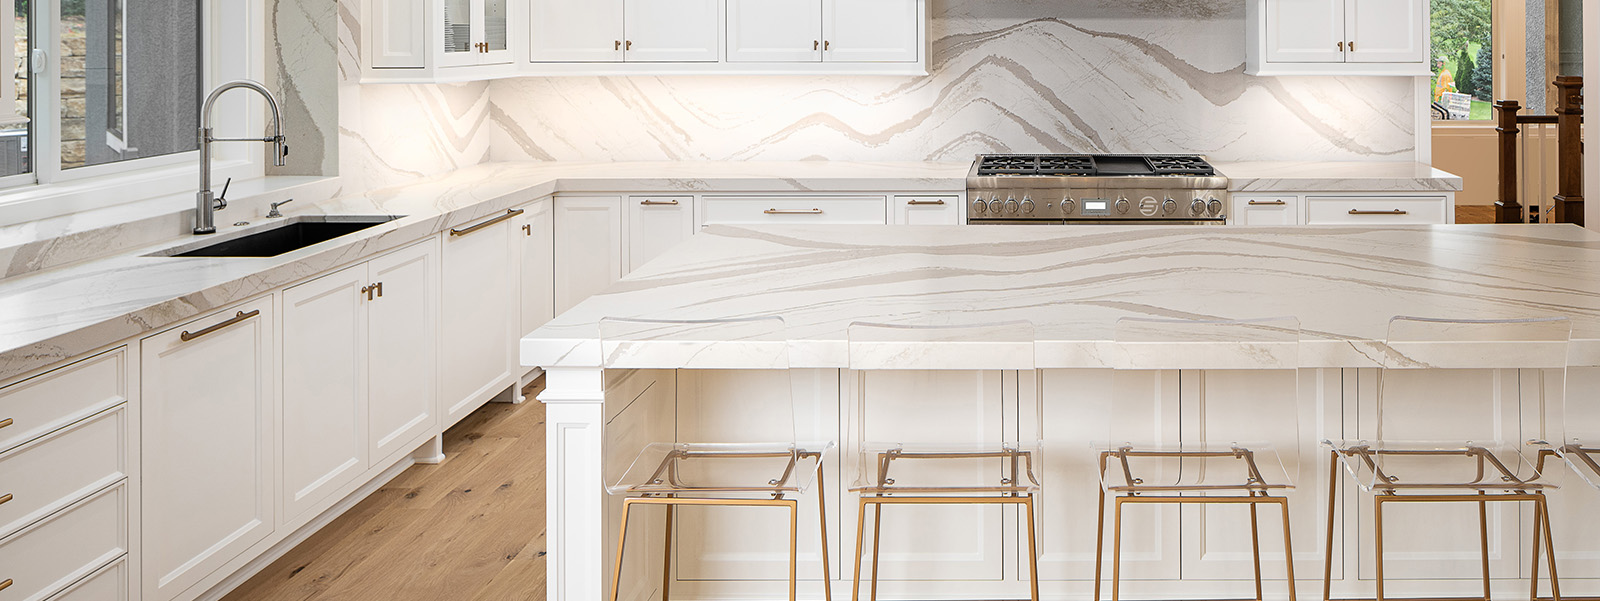 Is Marble Bad For Kitchens? 10 Things No One Tells You